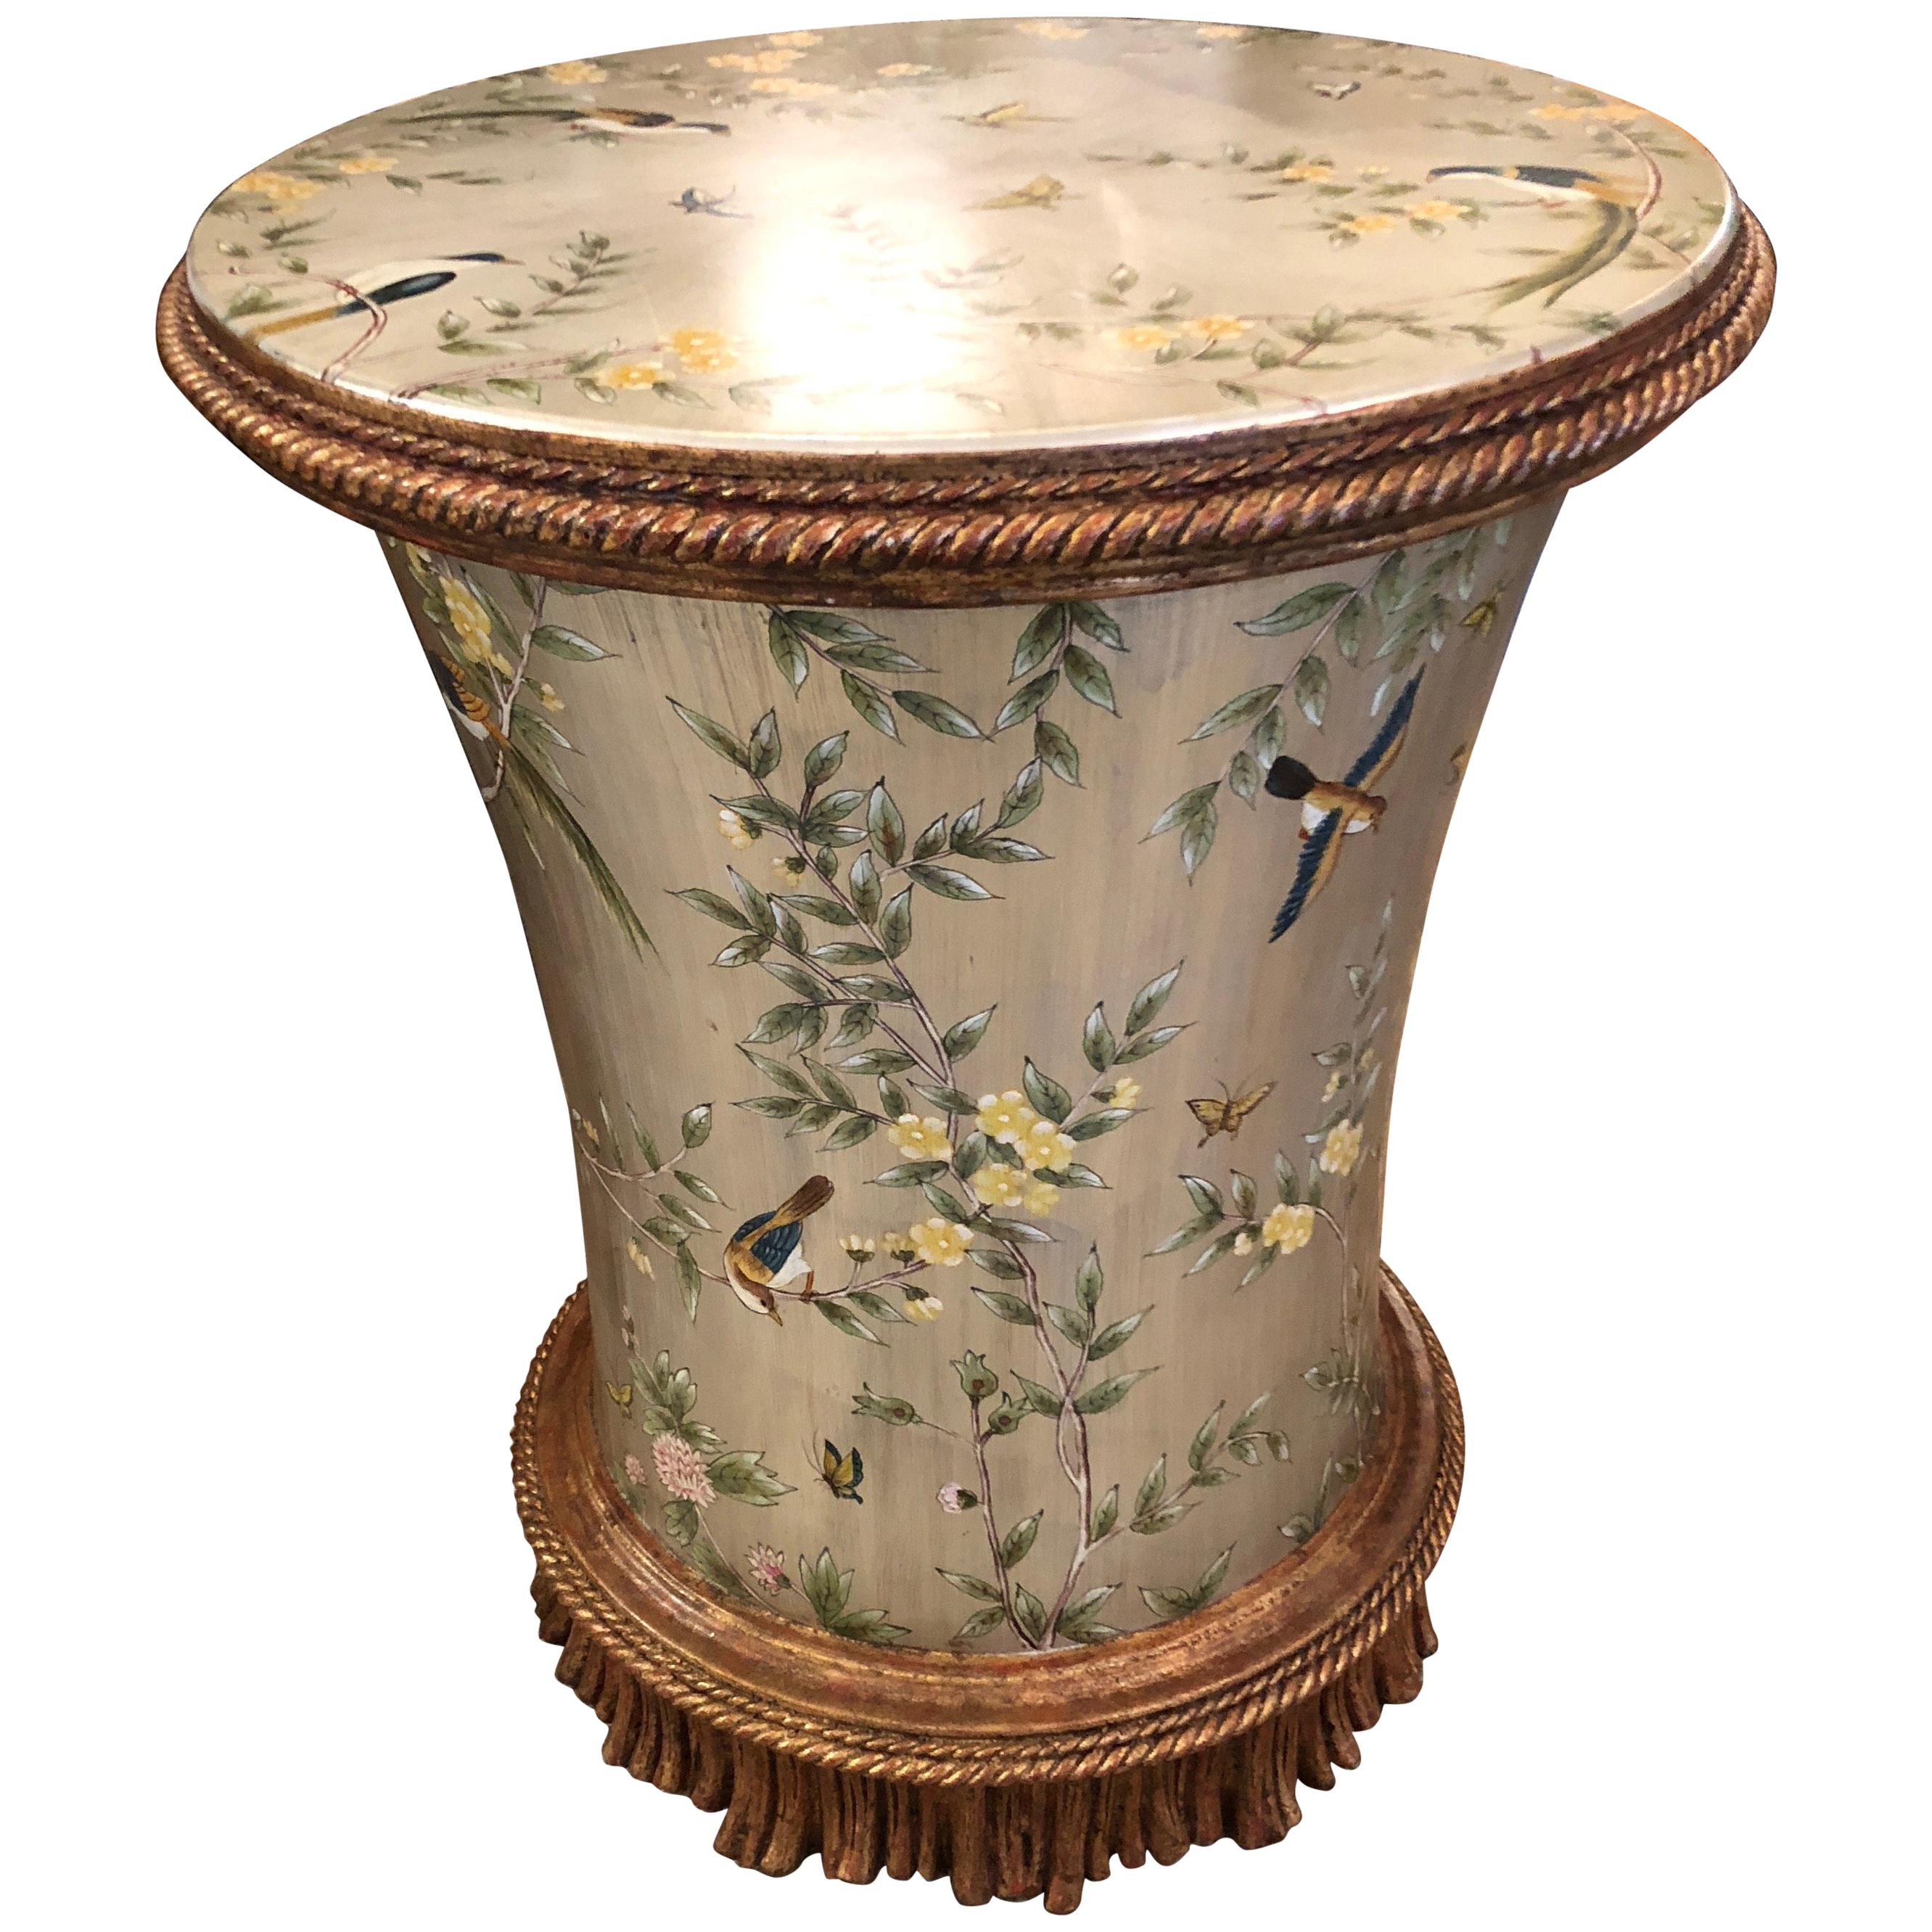 Fancy Lillian August Silver Leaf Side Table Adorned with Flowers and Birds